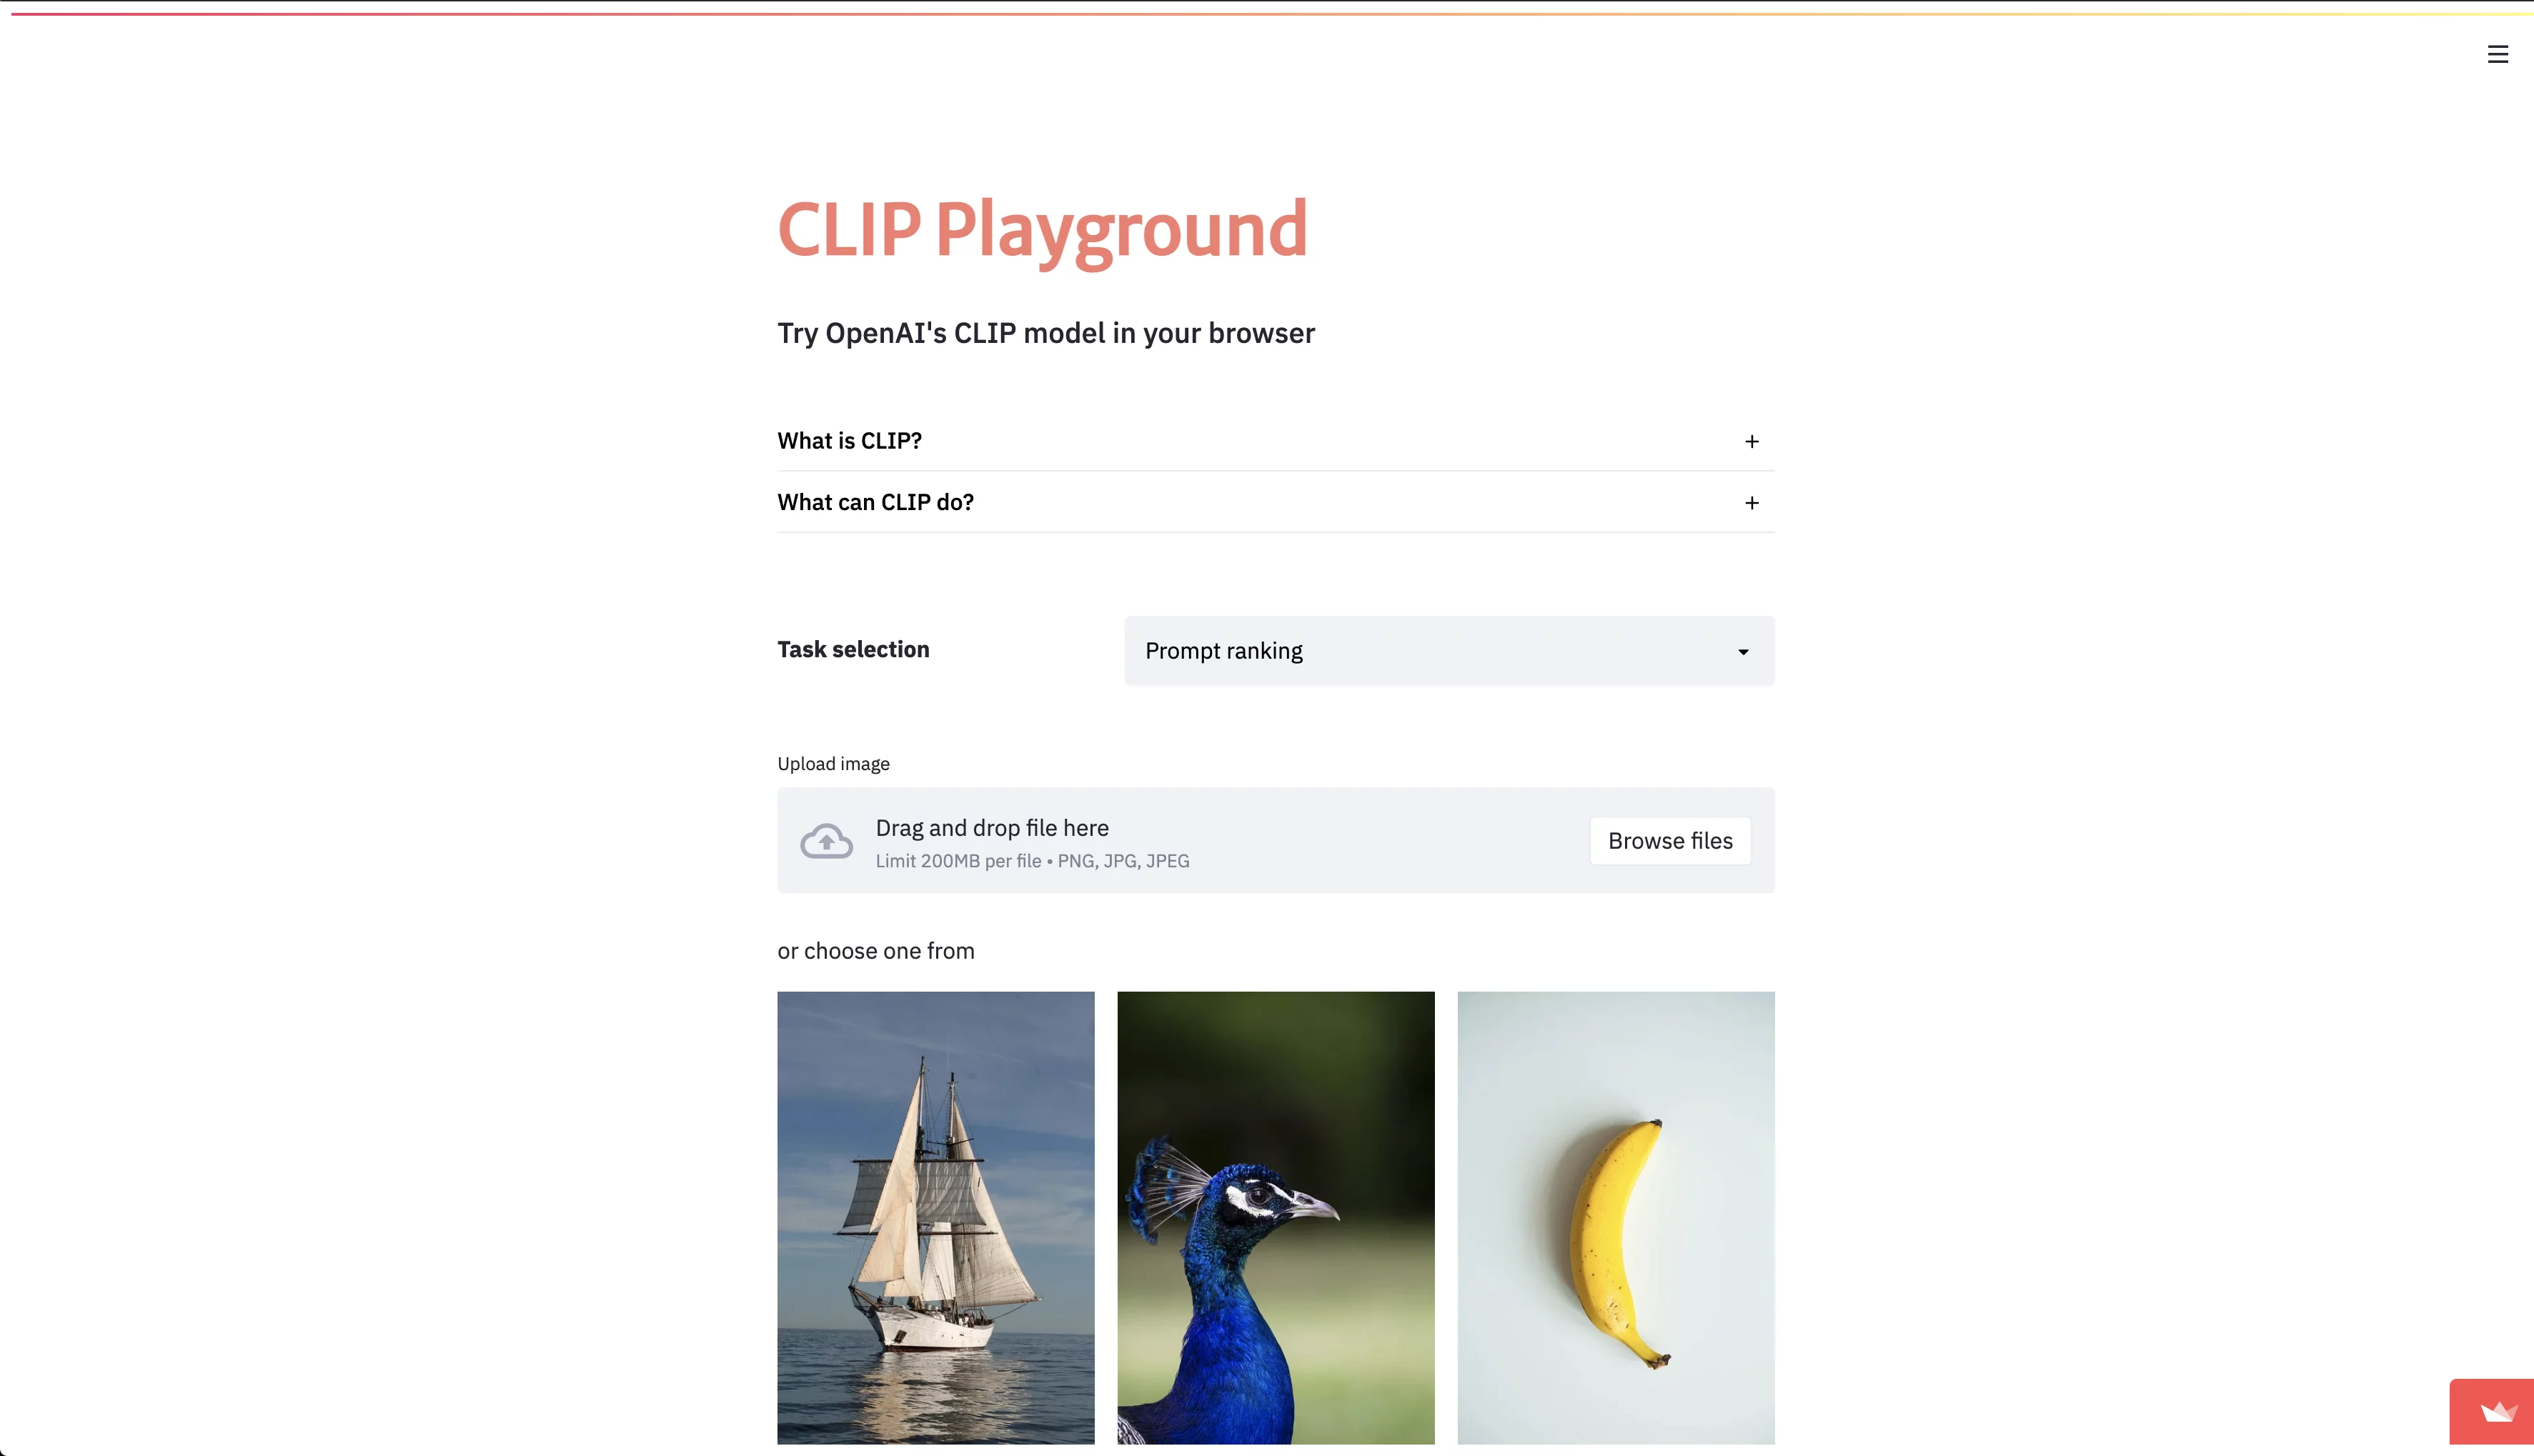  OpenAI's CLIP model in your browser, like GPT-3